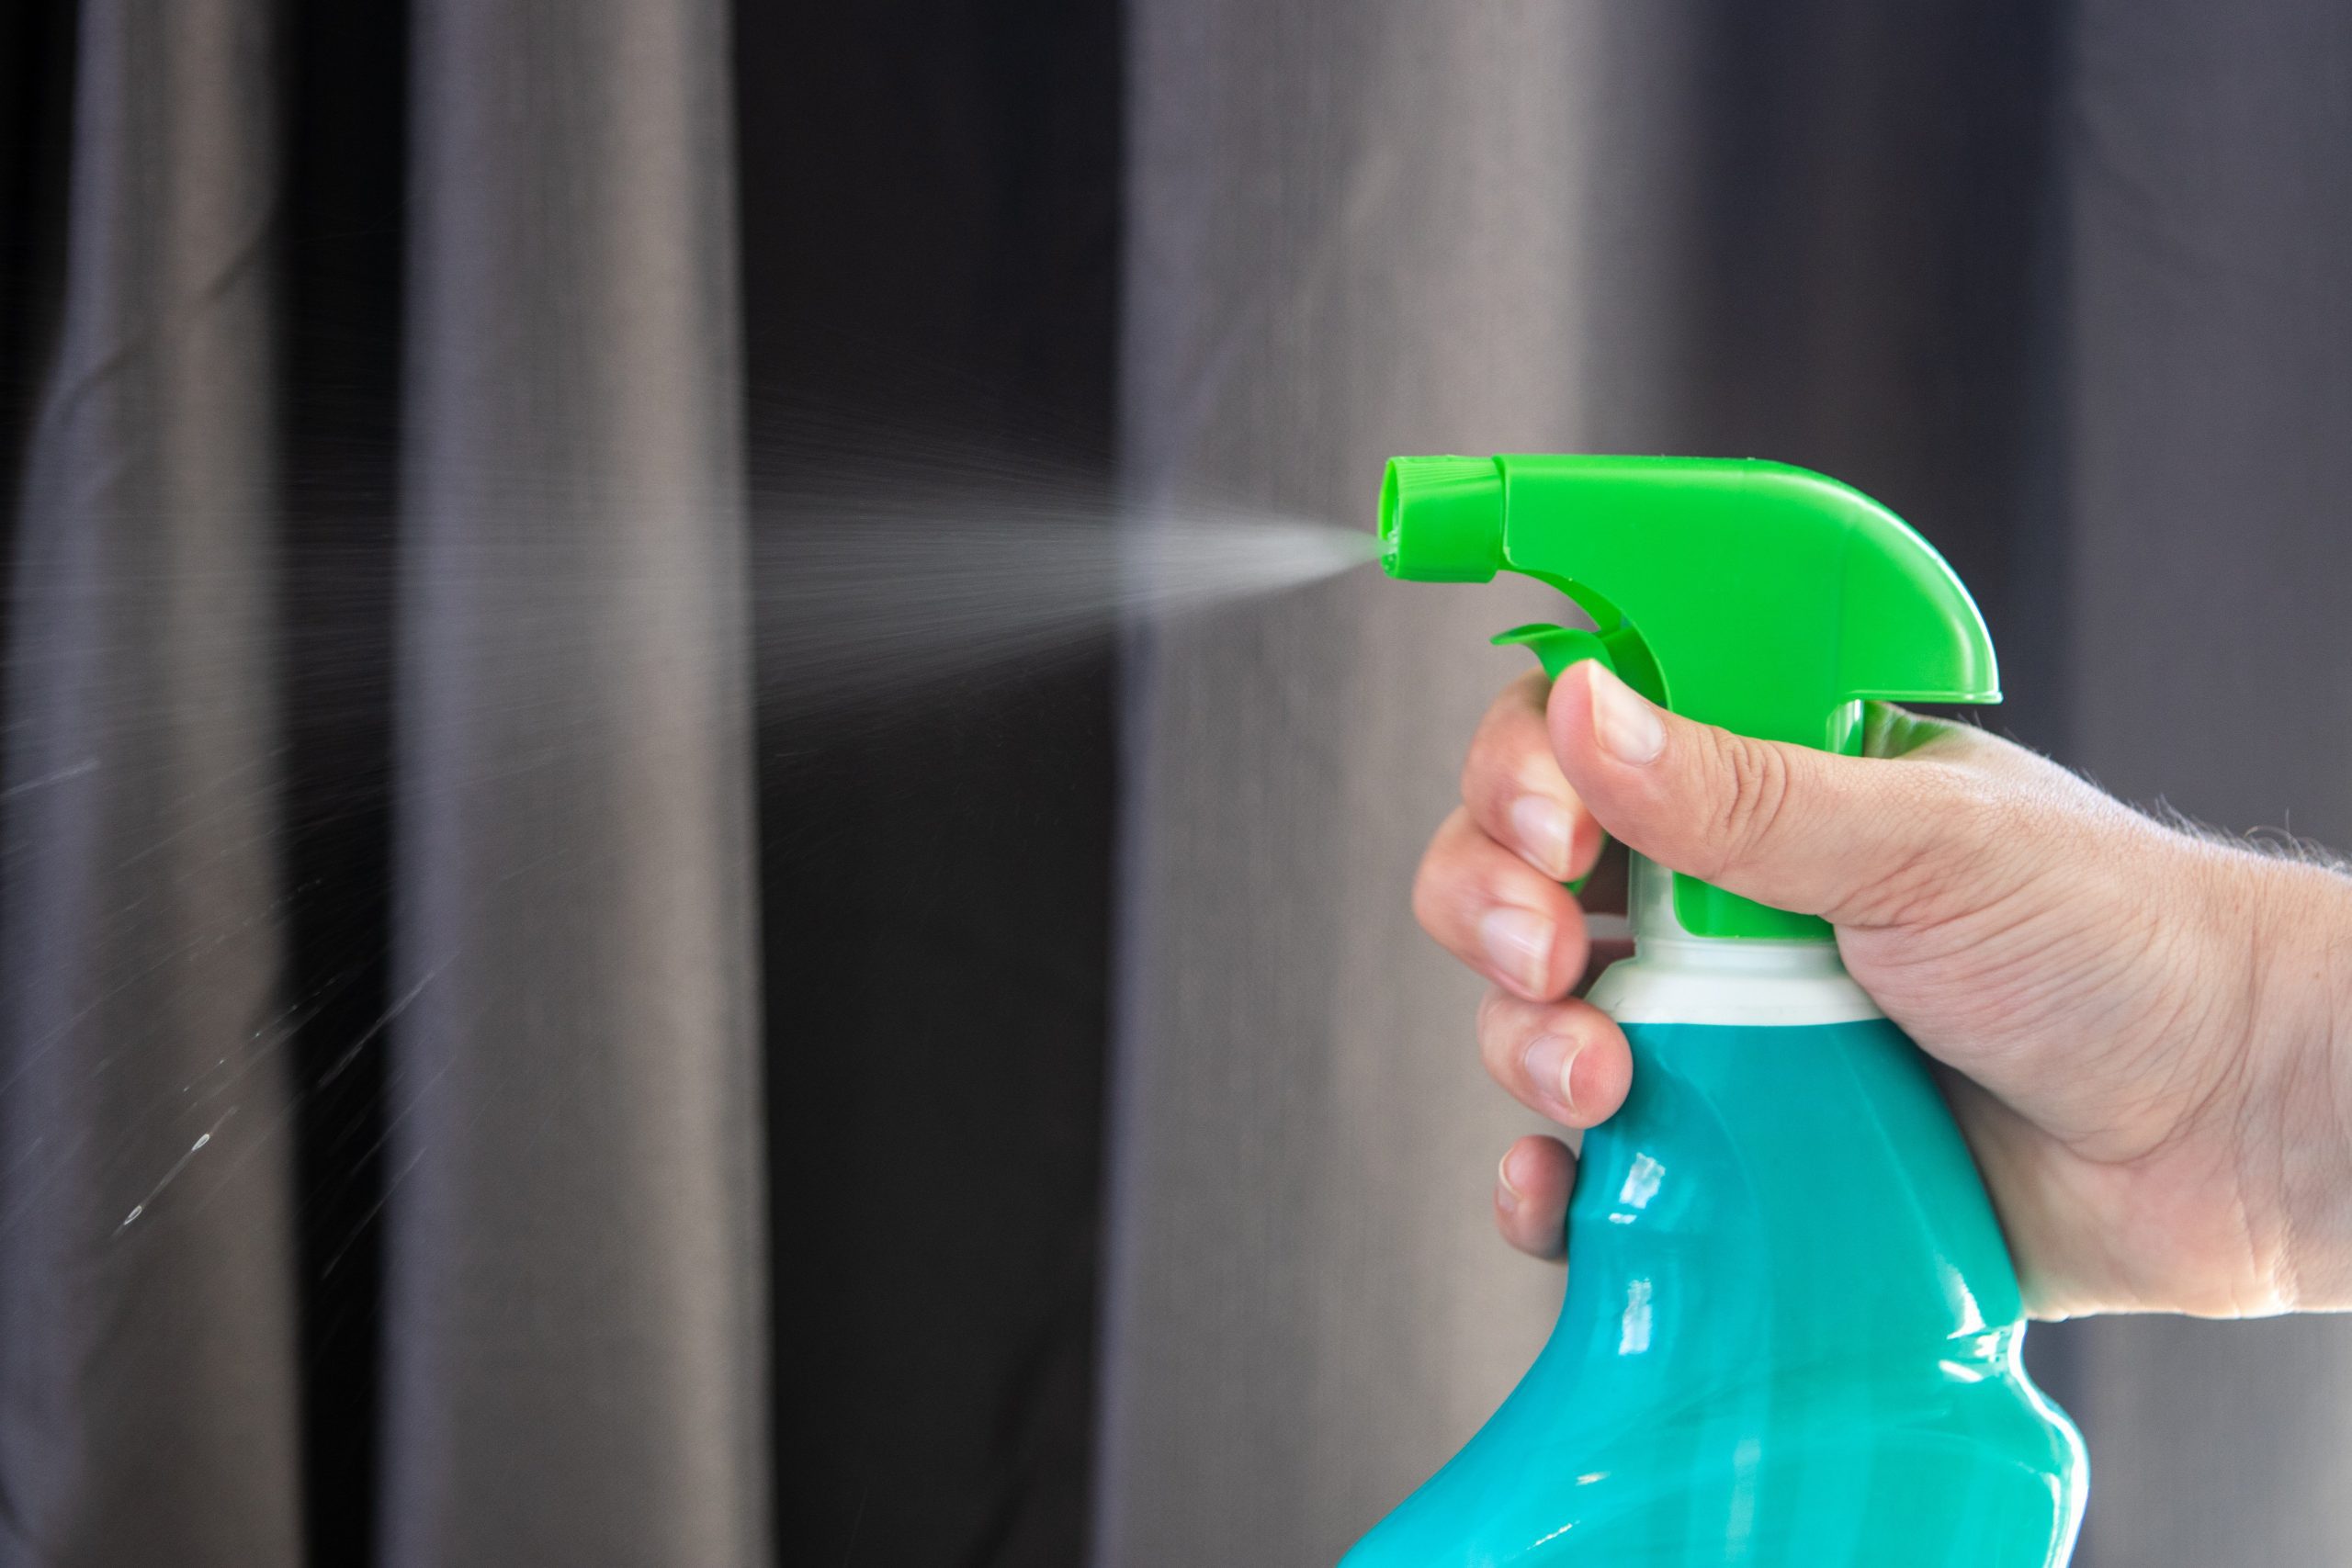 Sell Your Home Safely and Easily During a Pandemic requires extensive cleaning and sanitizing between showings. Pictured here is a spray sanitization bottle being used to clean a house